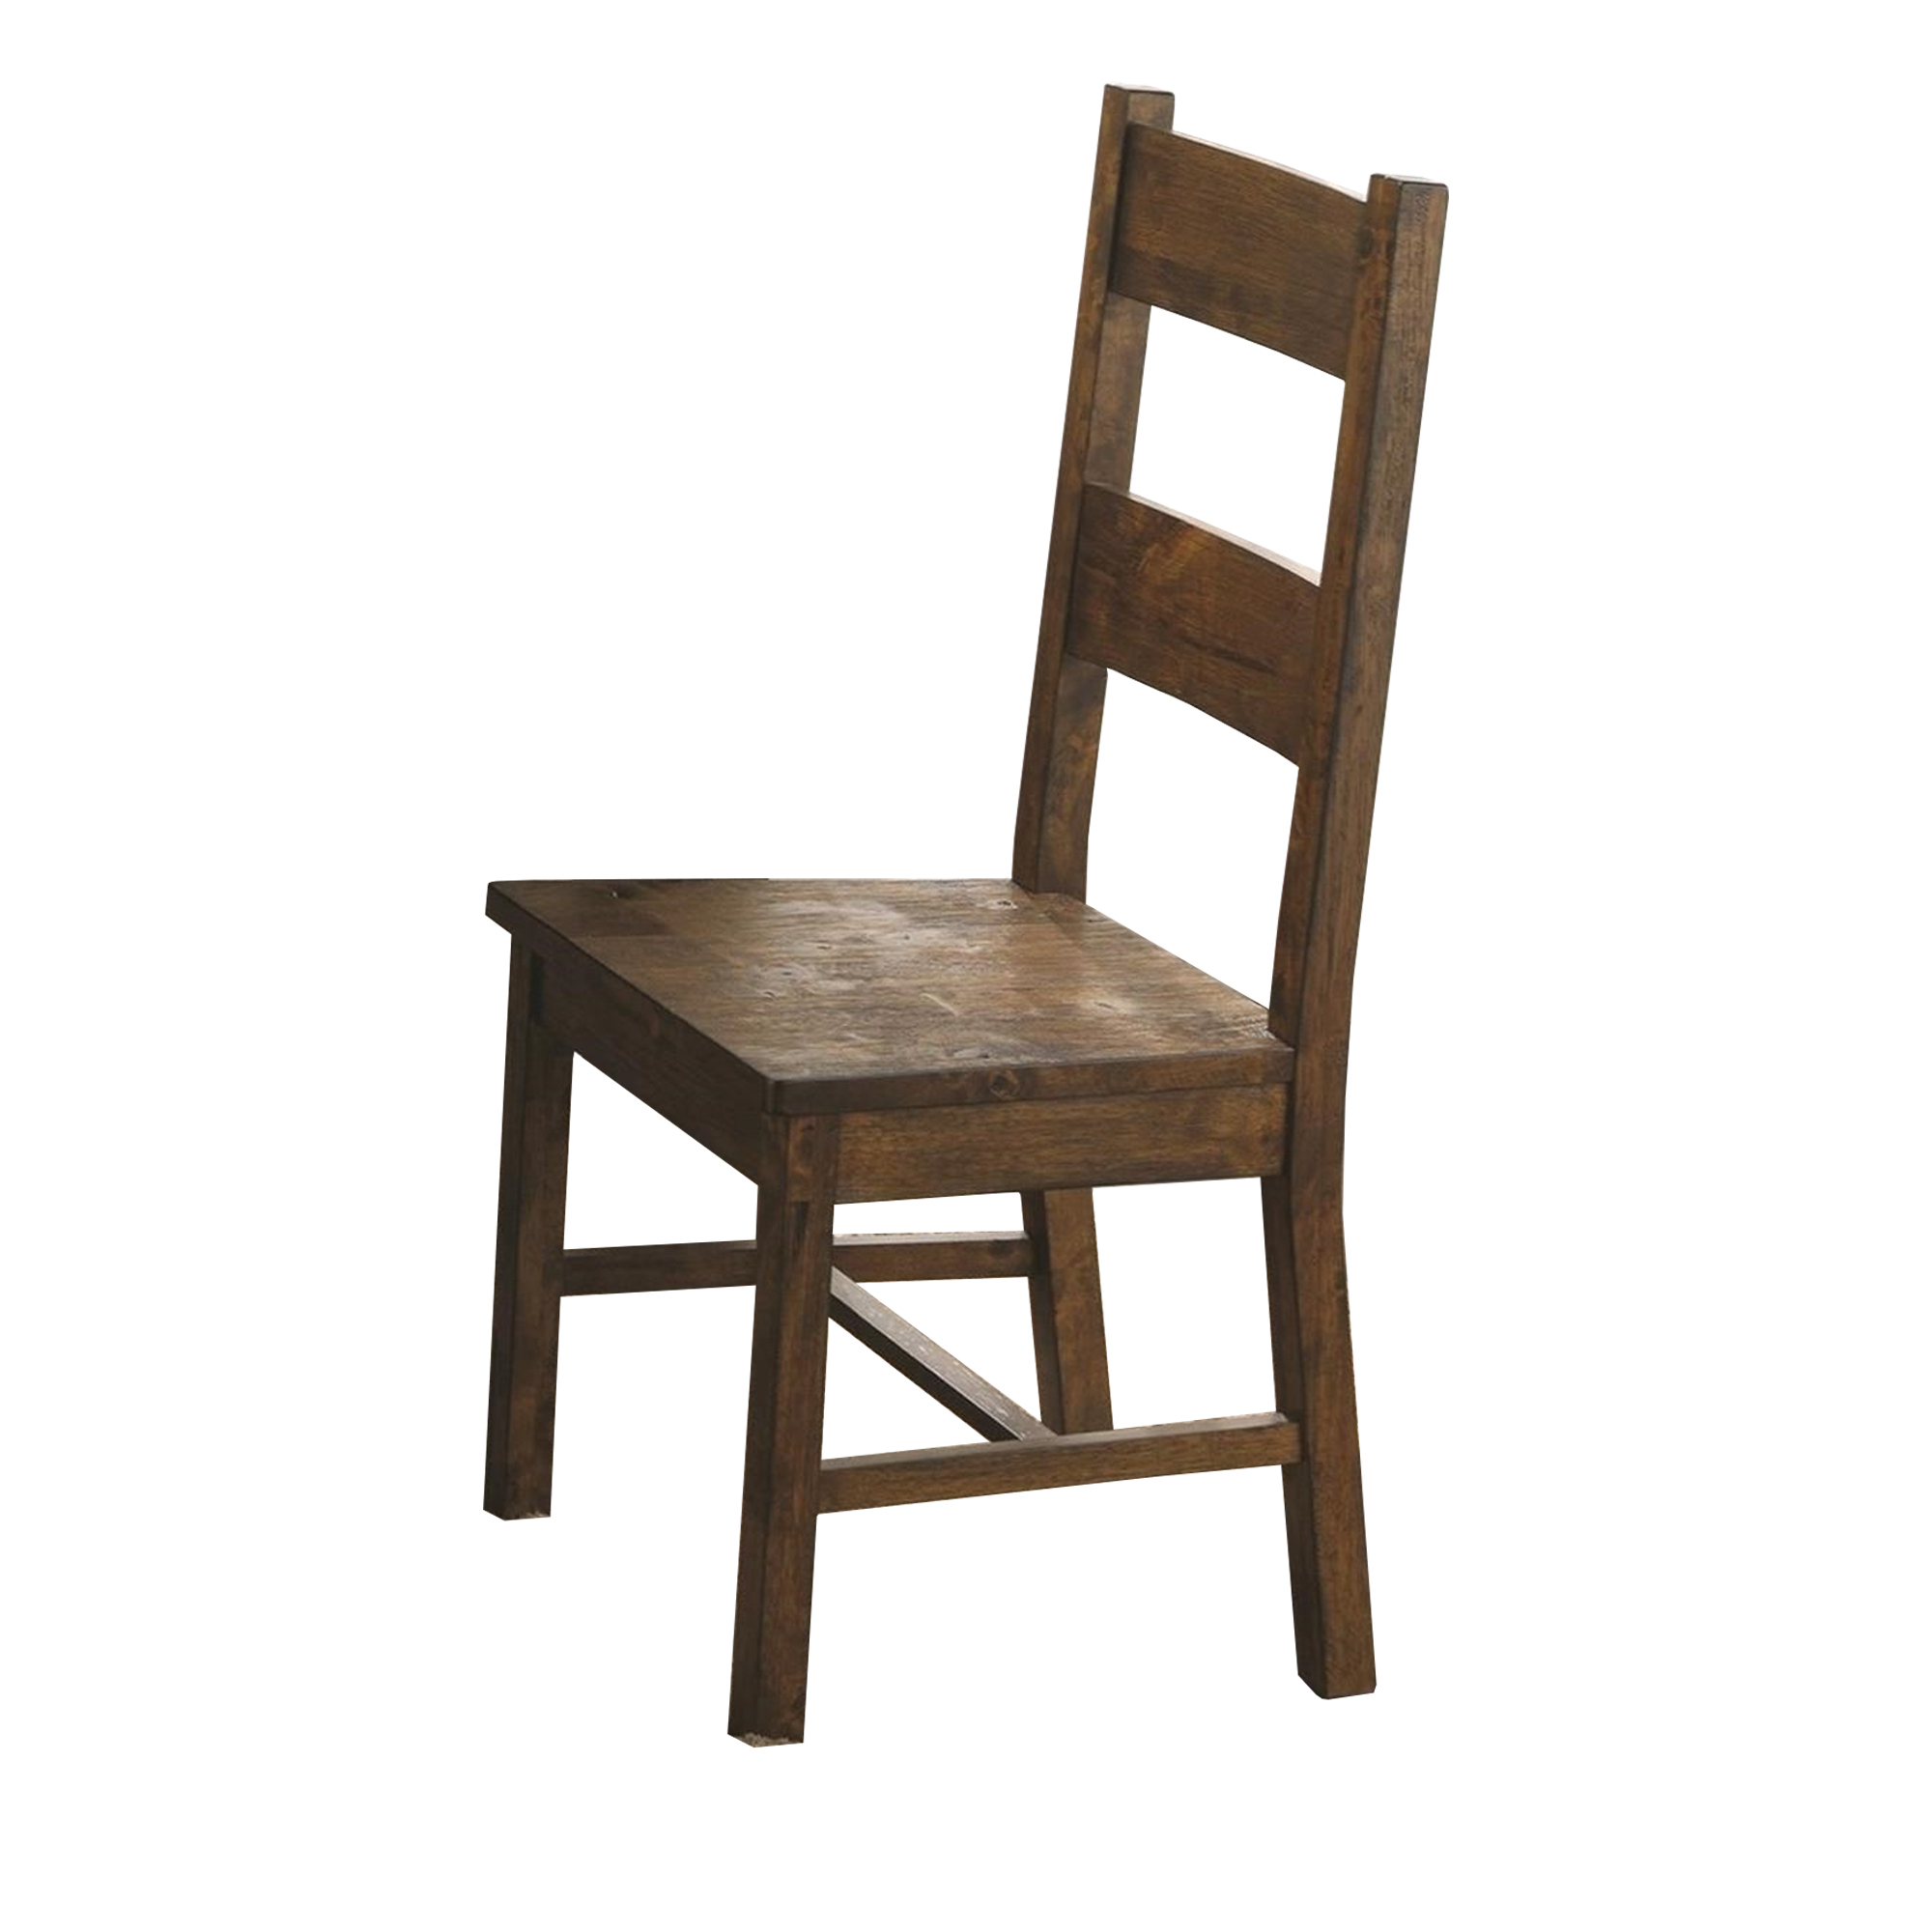 Chambr Armless Wooden Dining Side Chair, Rustic Golden Brown, Set Of 2- Saltoro Sherpi